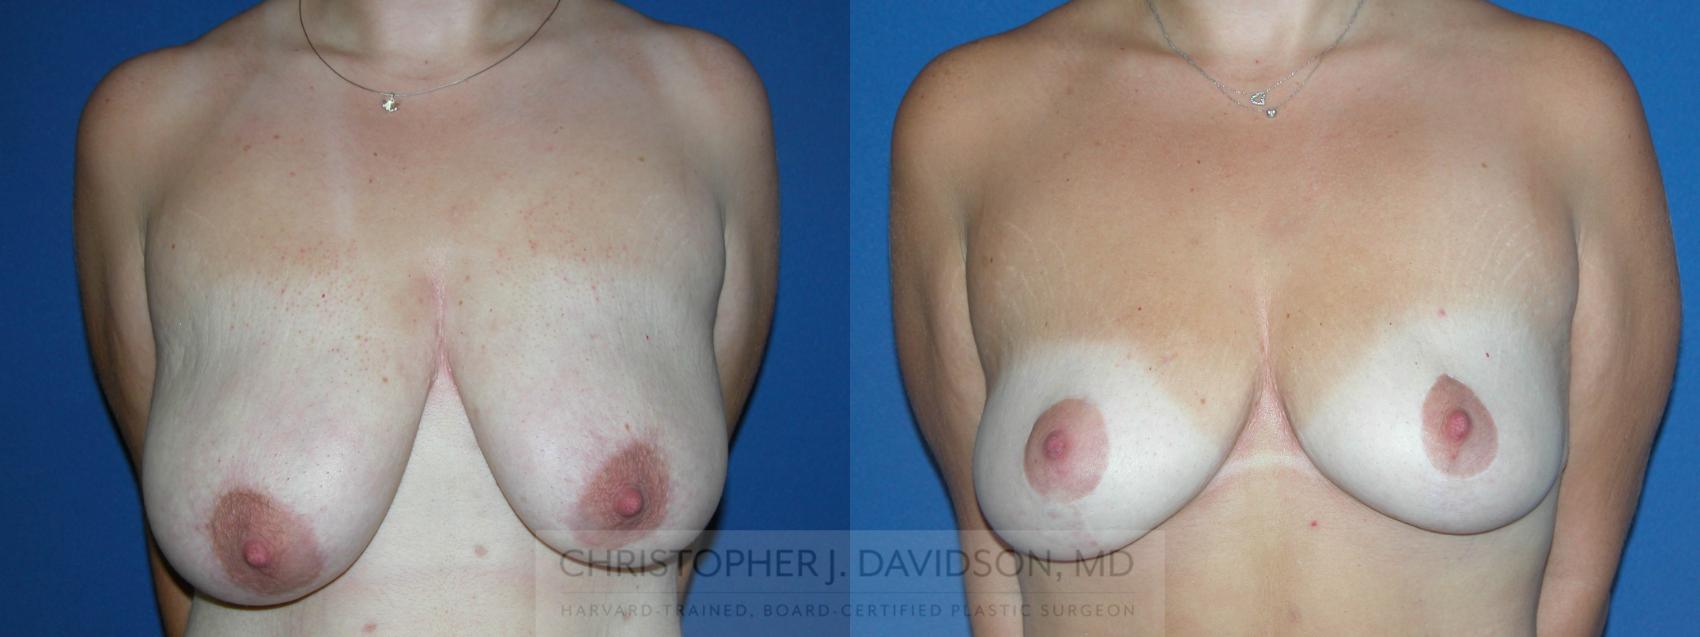 Breast Lift Case 174 Before & After View #1 | Wellesley & Boston, MA | Christopher J. Davidson, MD